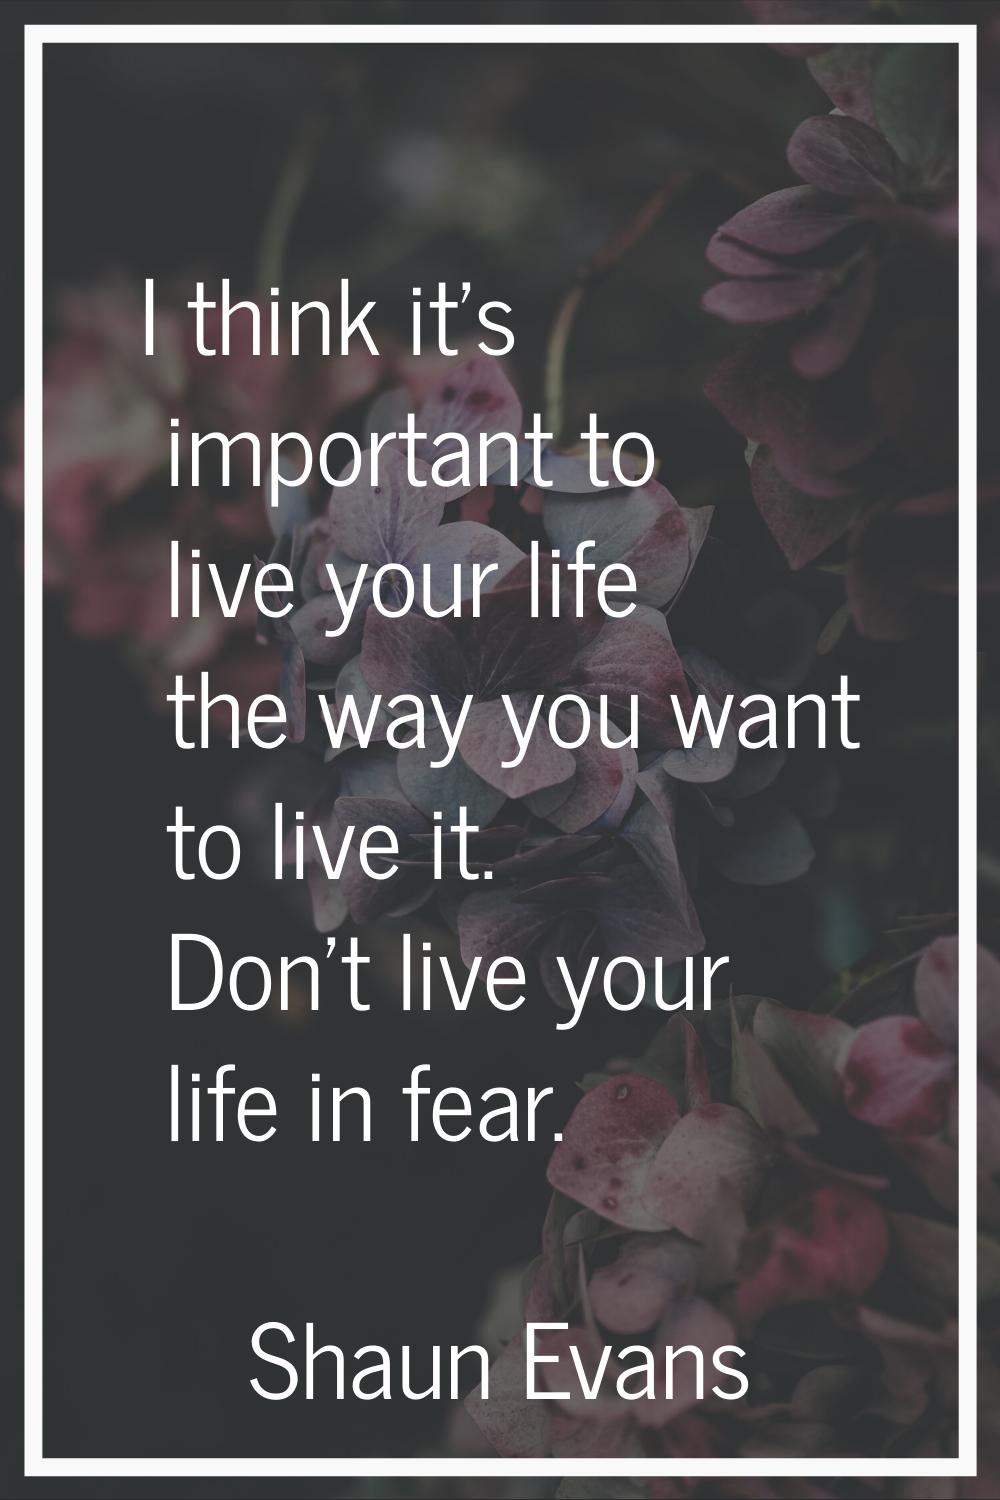 I think it's important to live your life the way you want to live it. Don't live your life in fear.